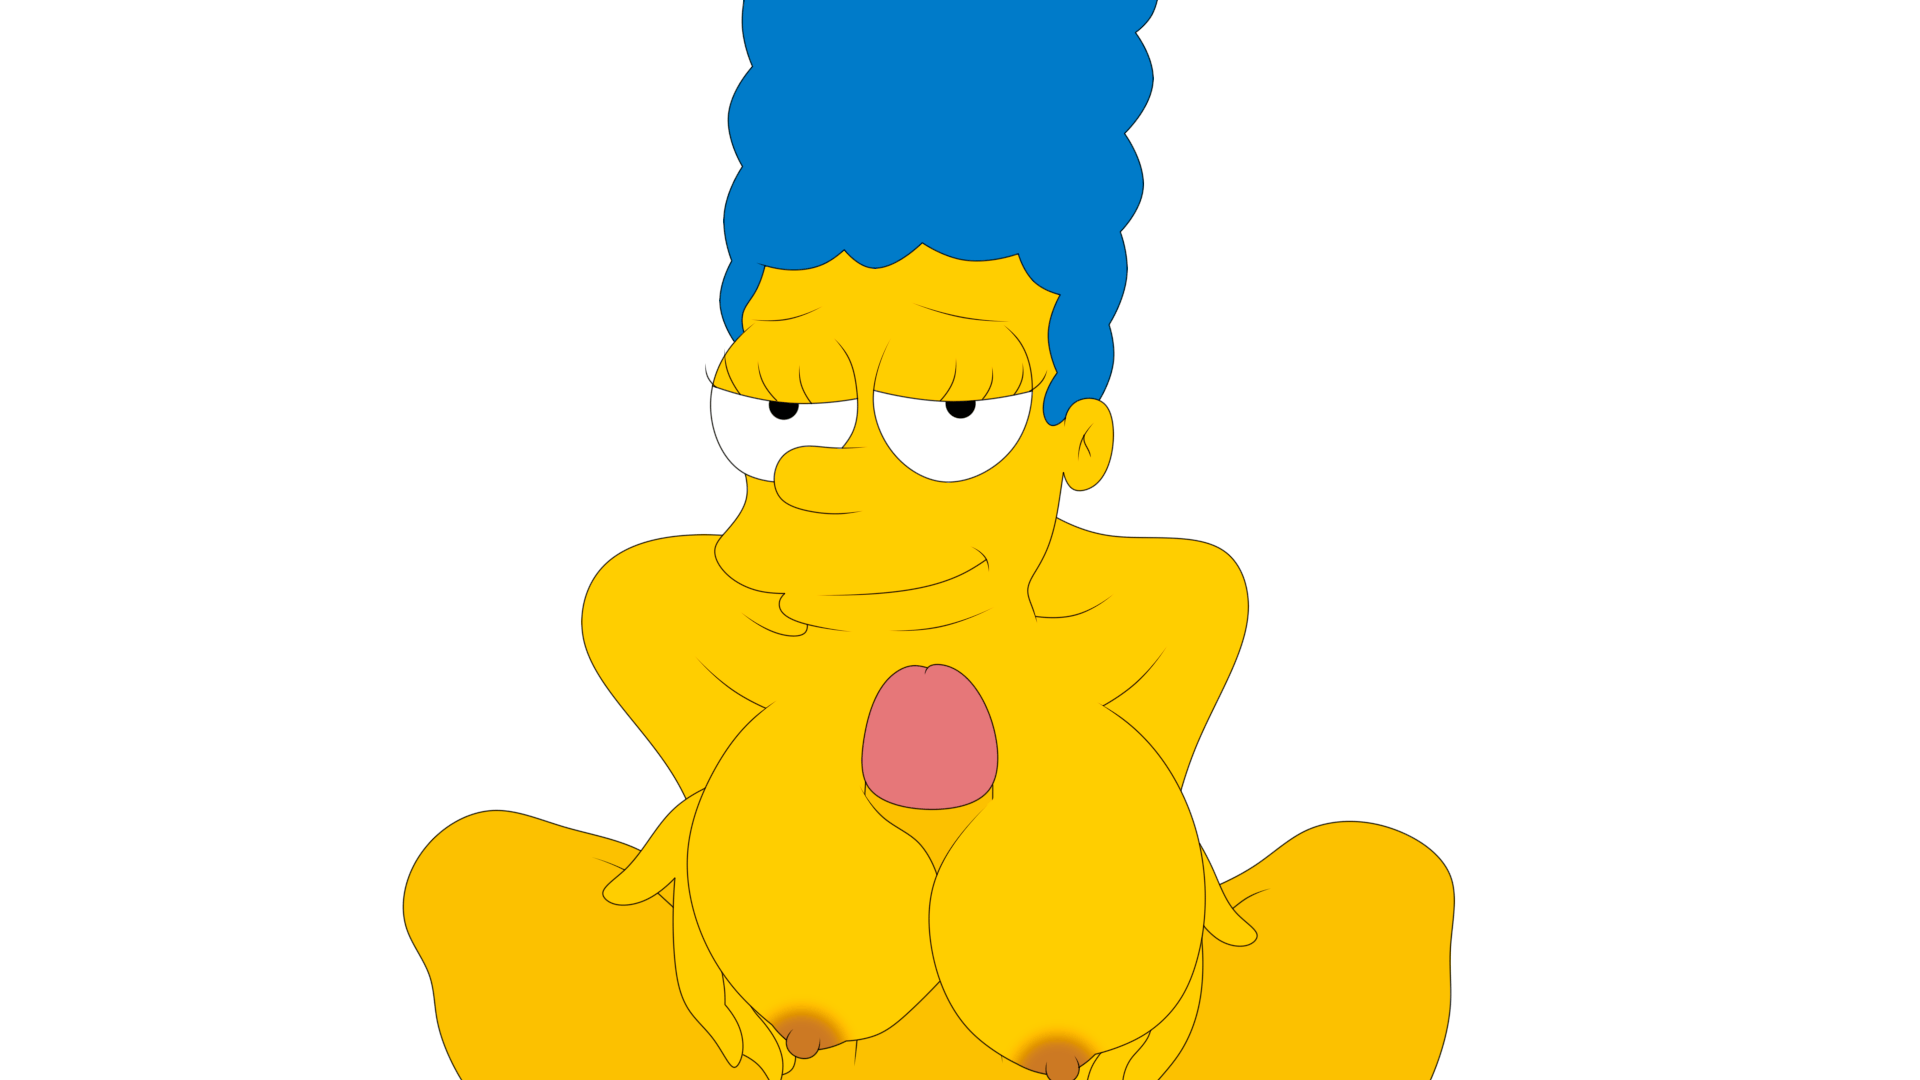 Sex porn. info gif marge giving a boob job 6372aecdb81f4 about Simpsons porn gifs. Enjoy watching new porn gifs every day